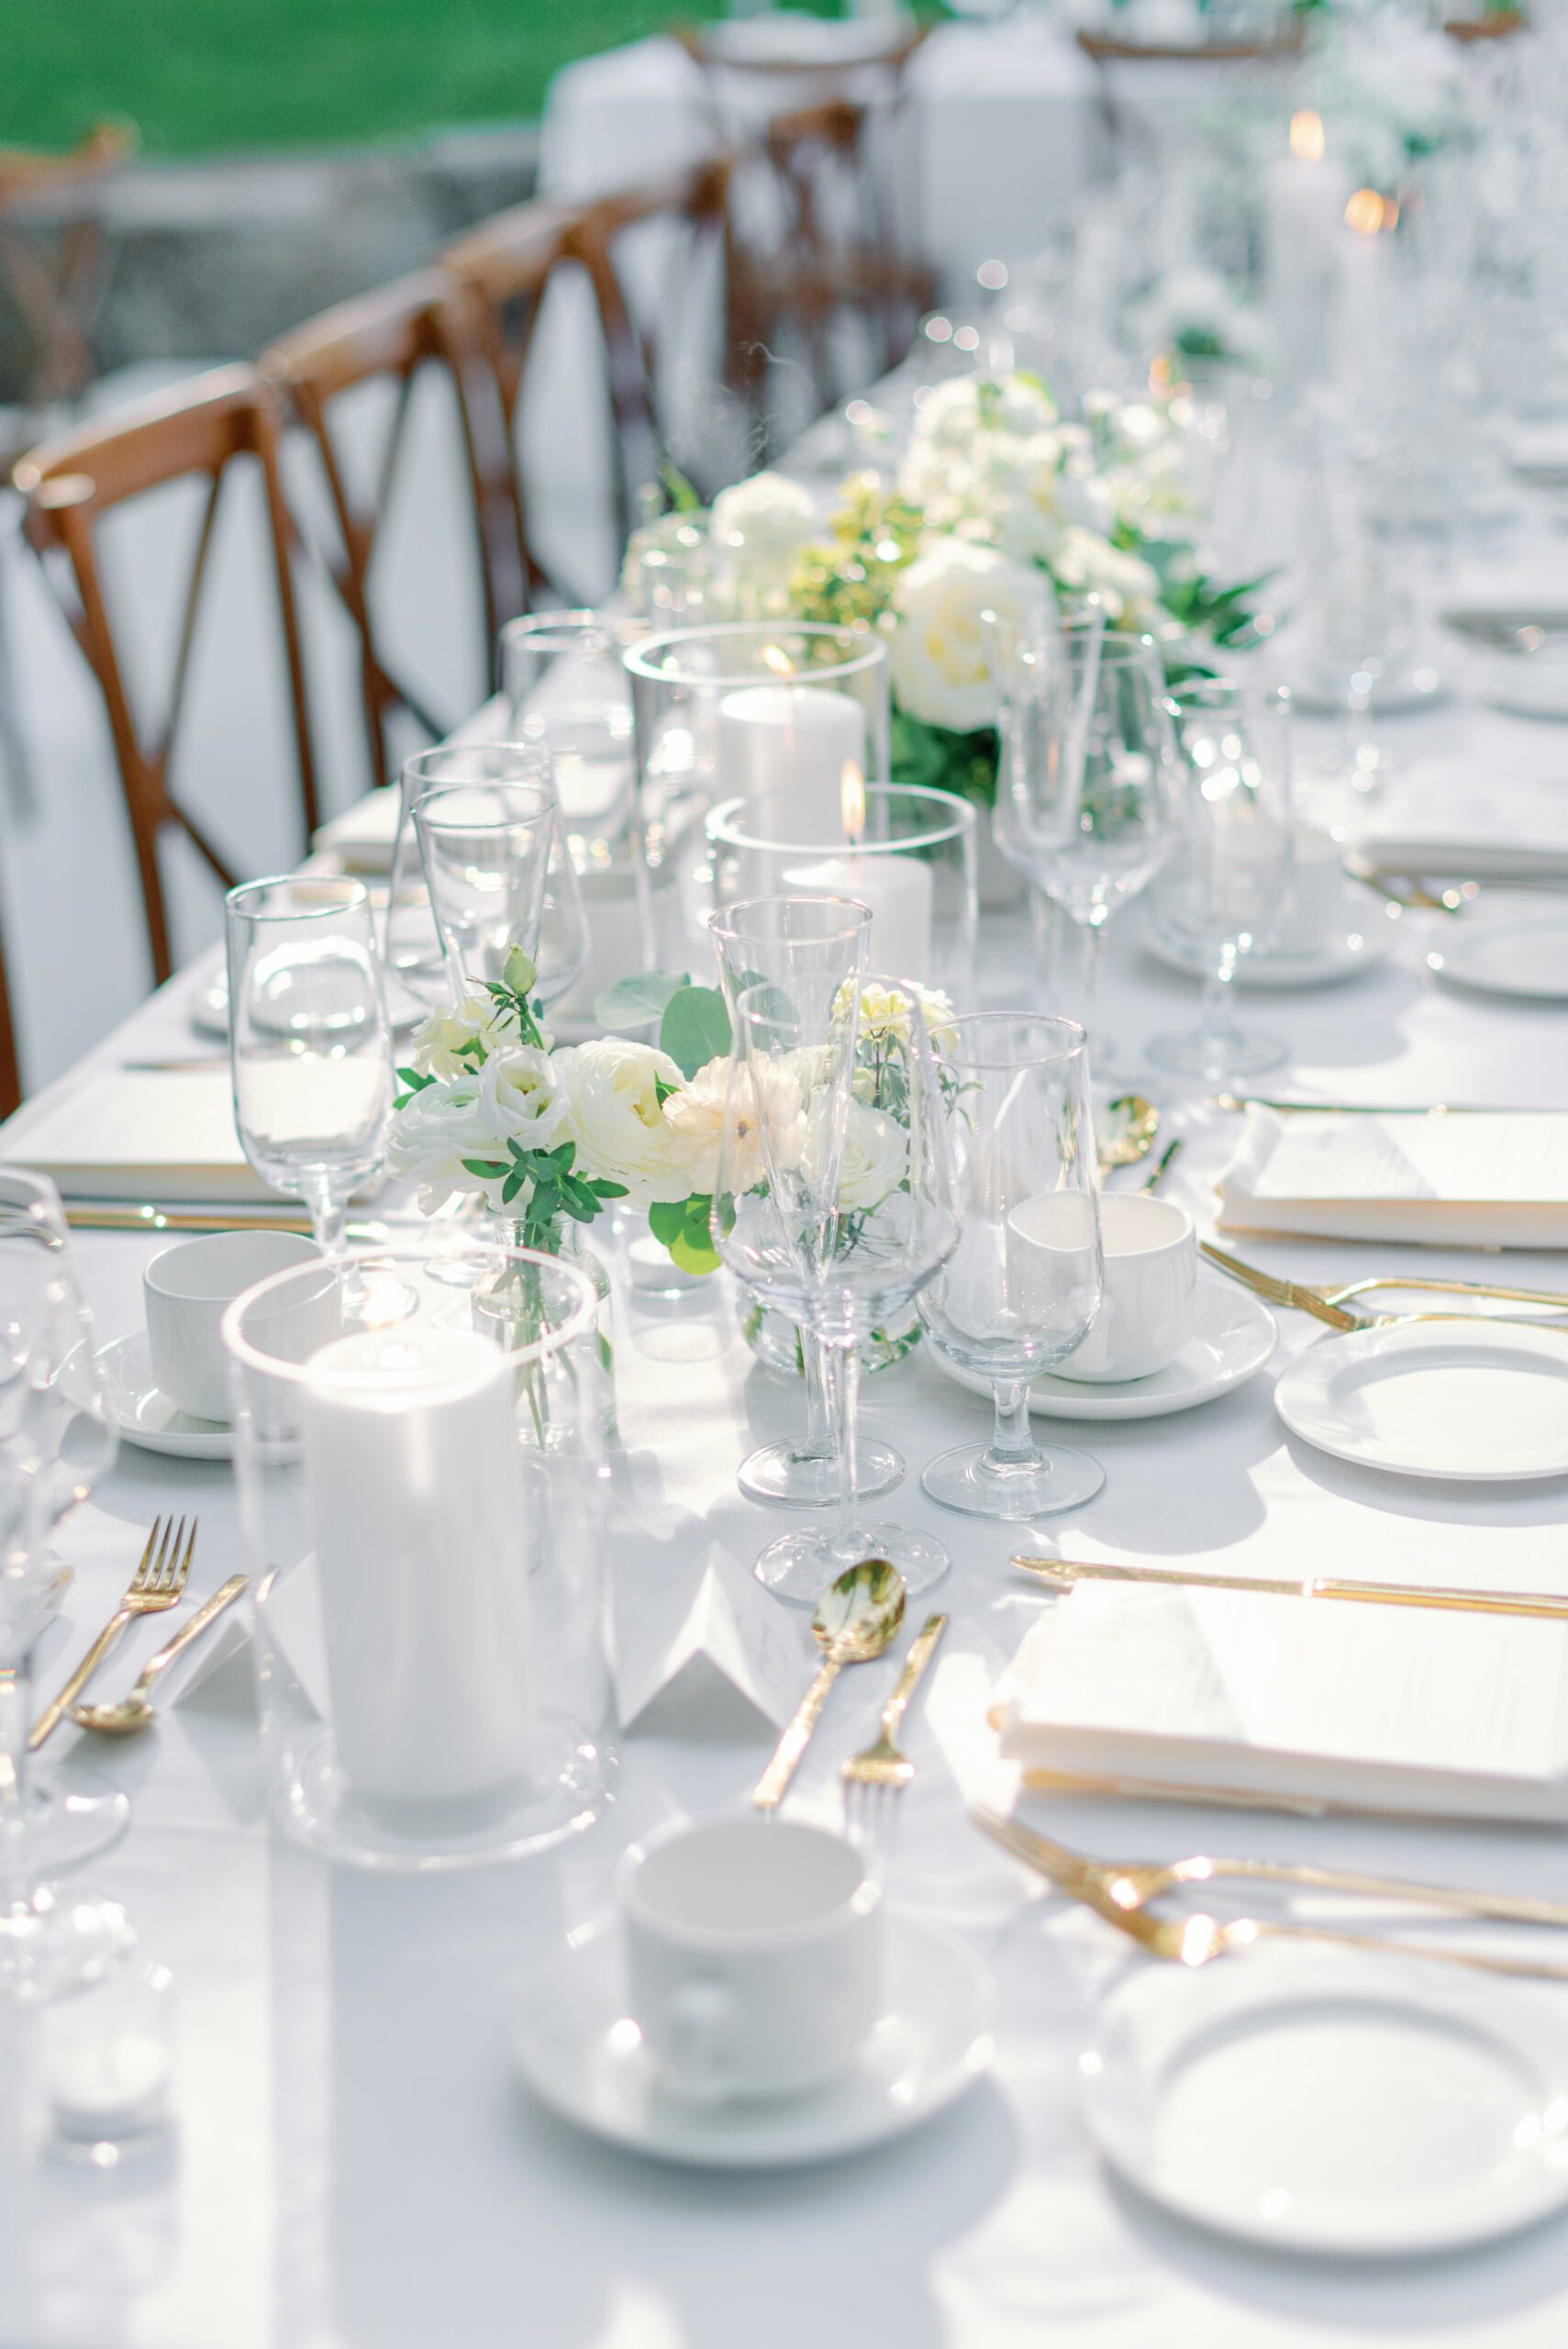 White and gold table setting at wedding.